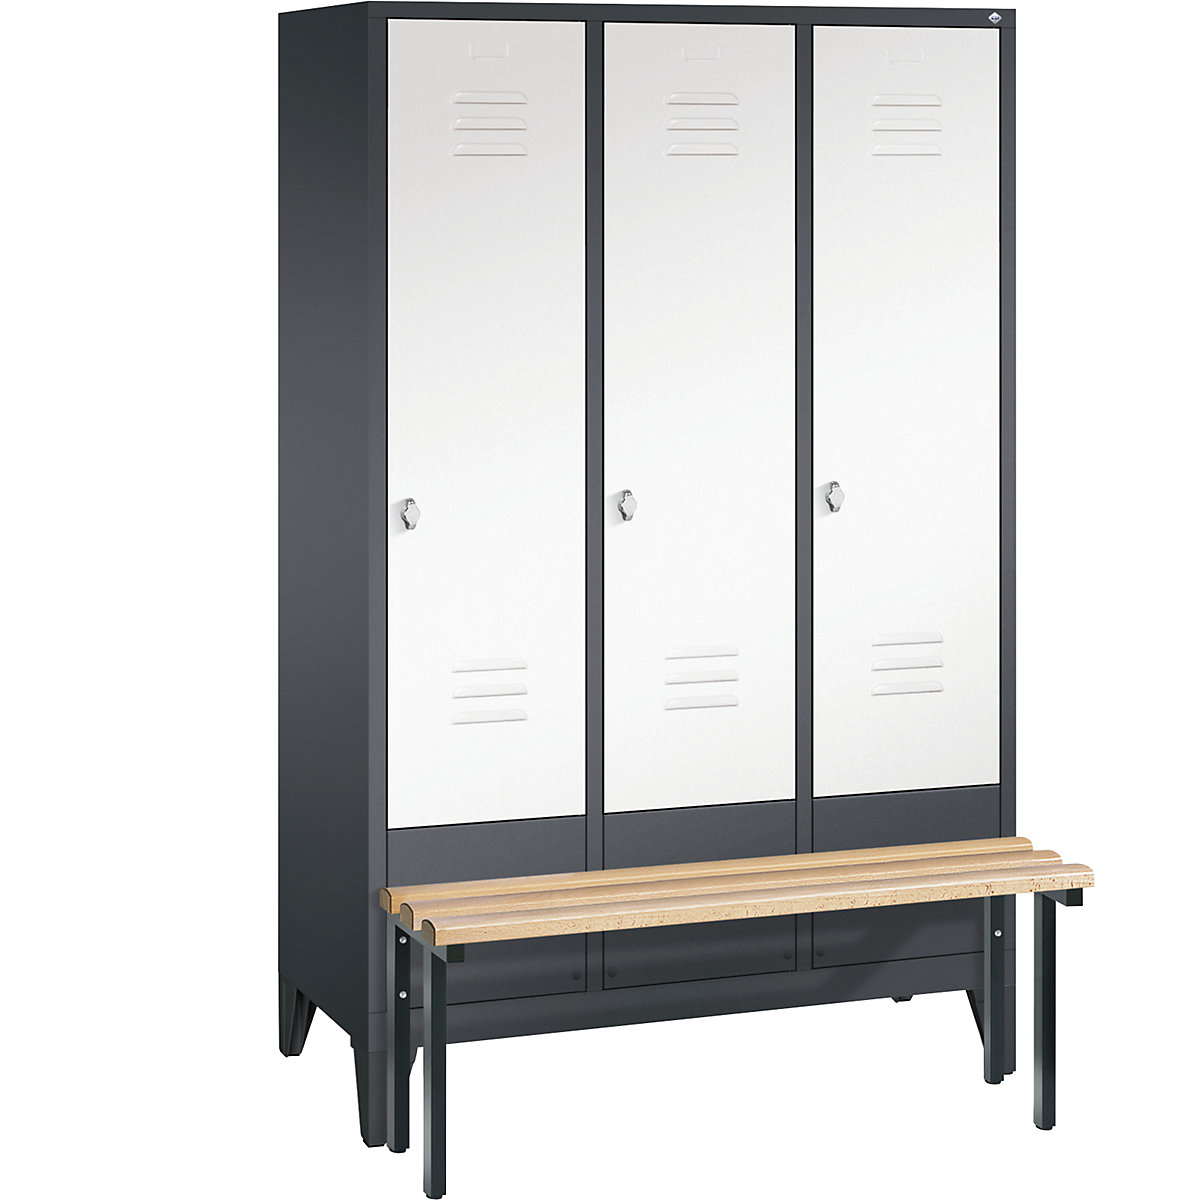 CLASSIC cloakroom locker with bench mounted in front – C+P, 3 compartments, compartment width 400 mm, black grey / traffic white-4